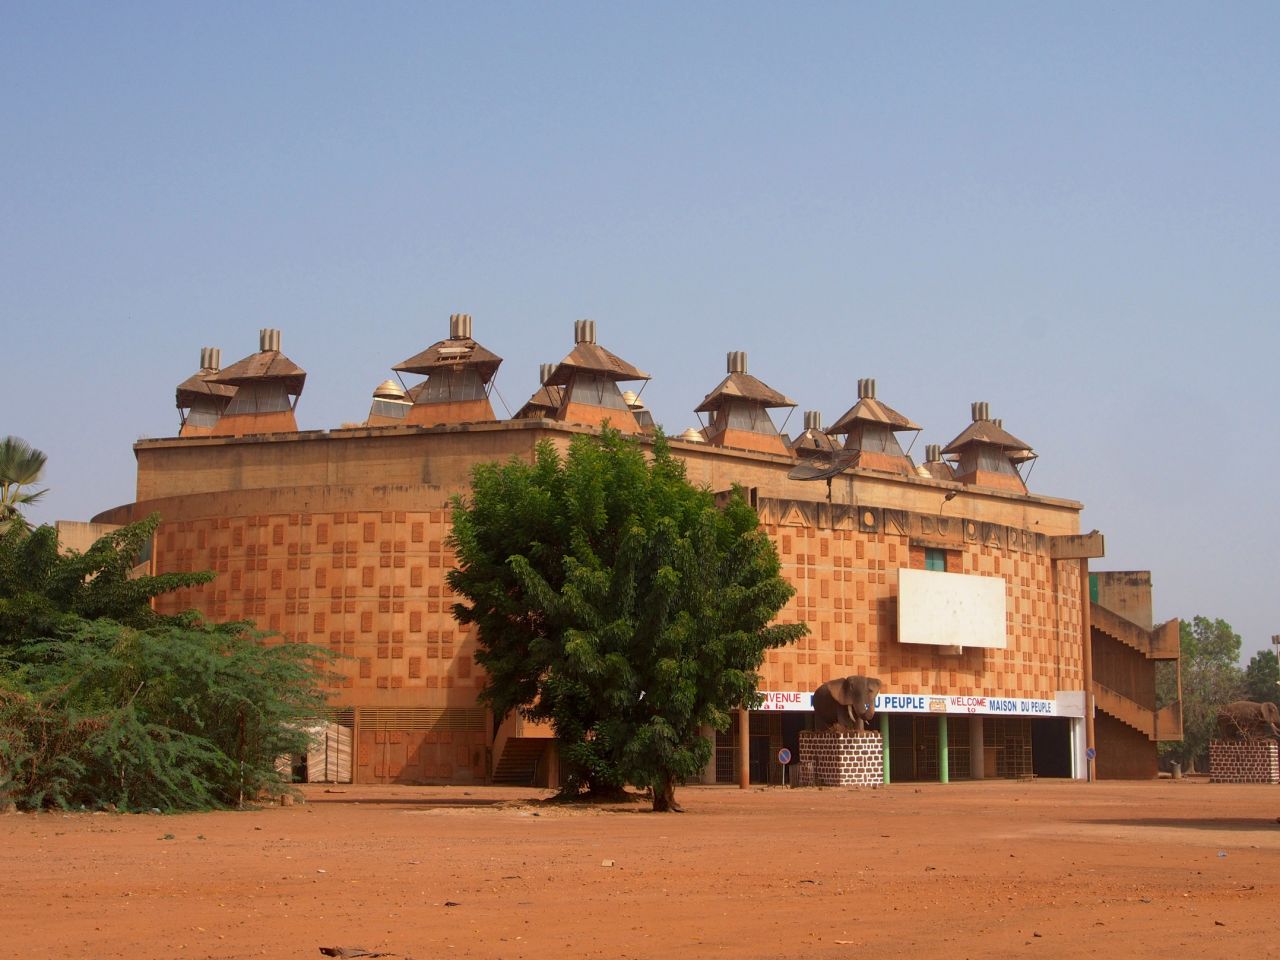 <strong>La Maison du Peuple, Ouagadougou, Burkina Faso: </strong>Individuals and community-led organizations nominated sites. The final list includes this African modernist building in Burkina Faso.